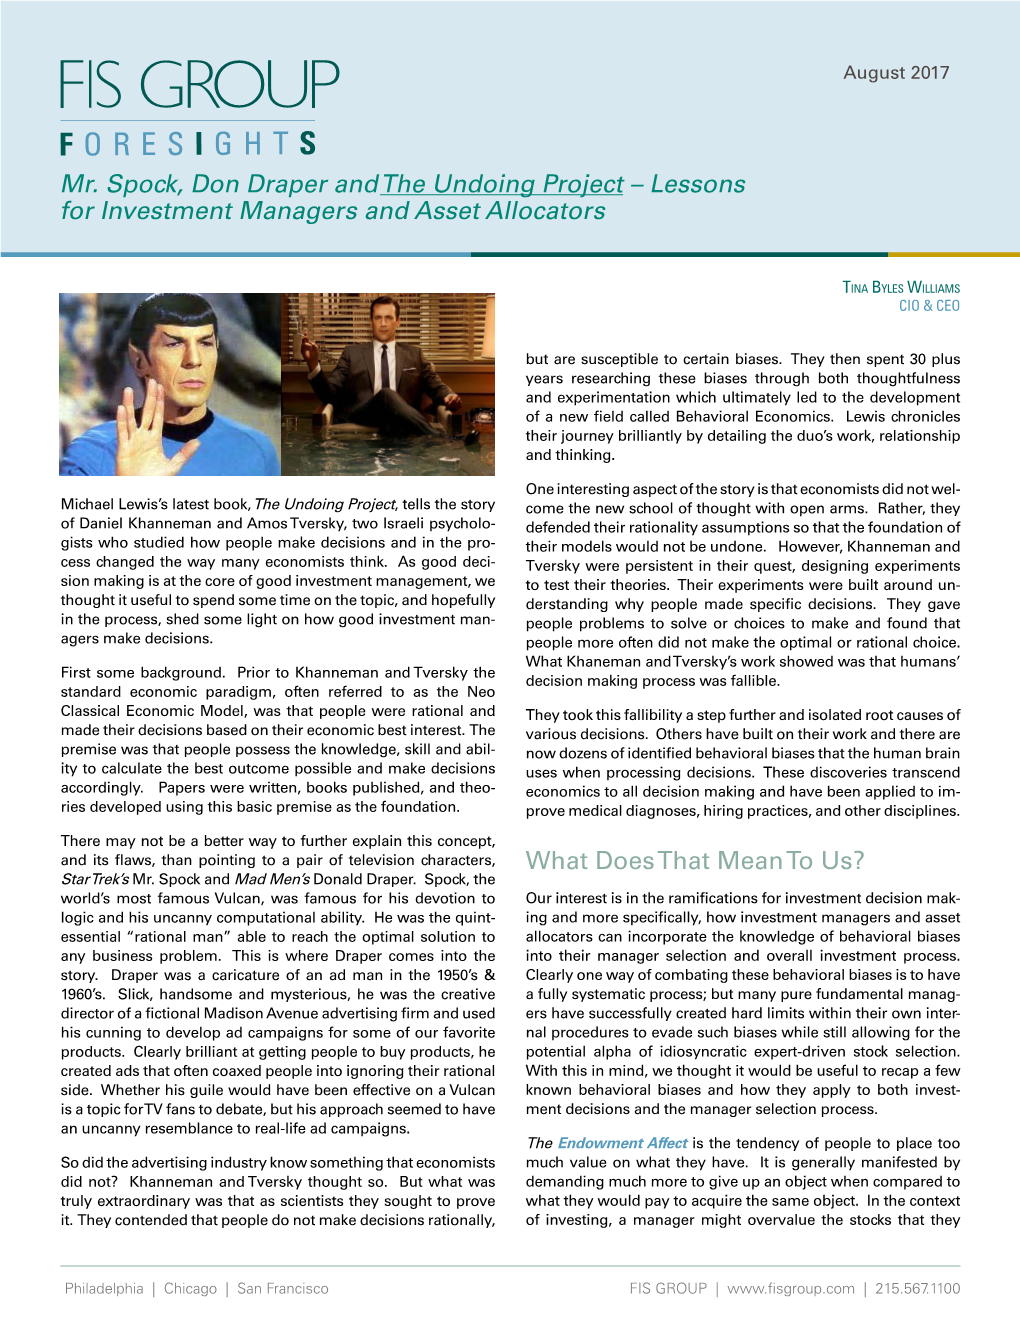 Mr. Spock, Don Draper and the Undoing Project – Lessons for Investment Managers and Asset Allocators